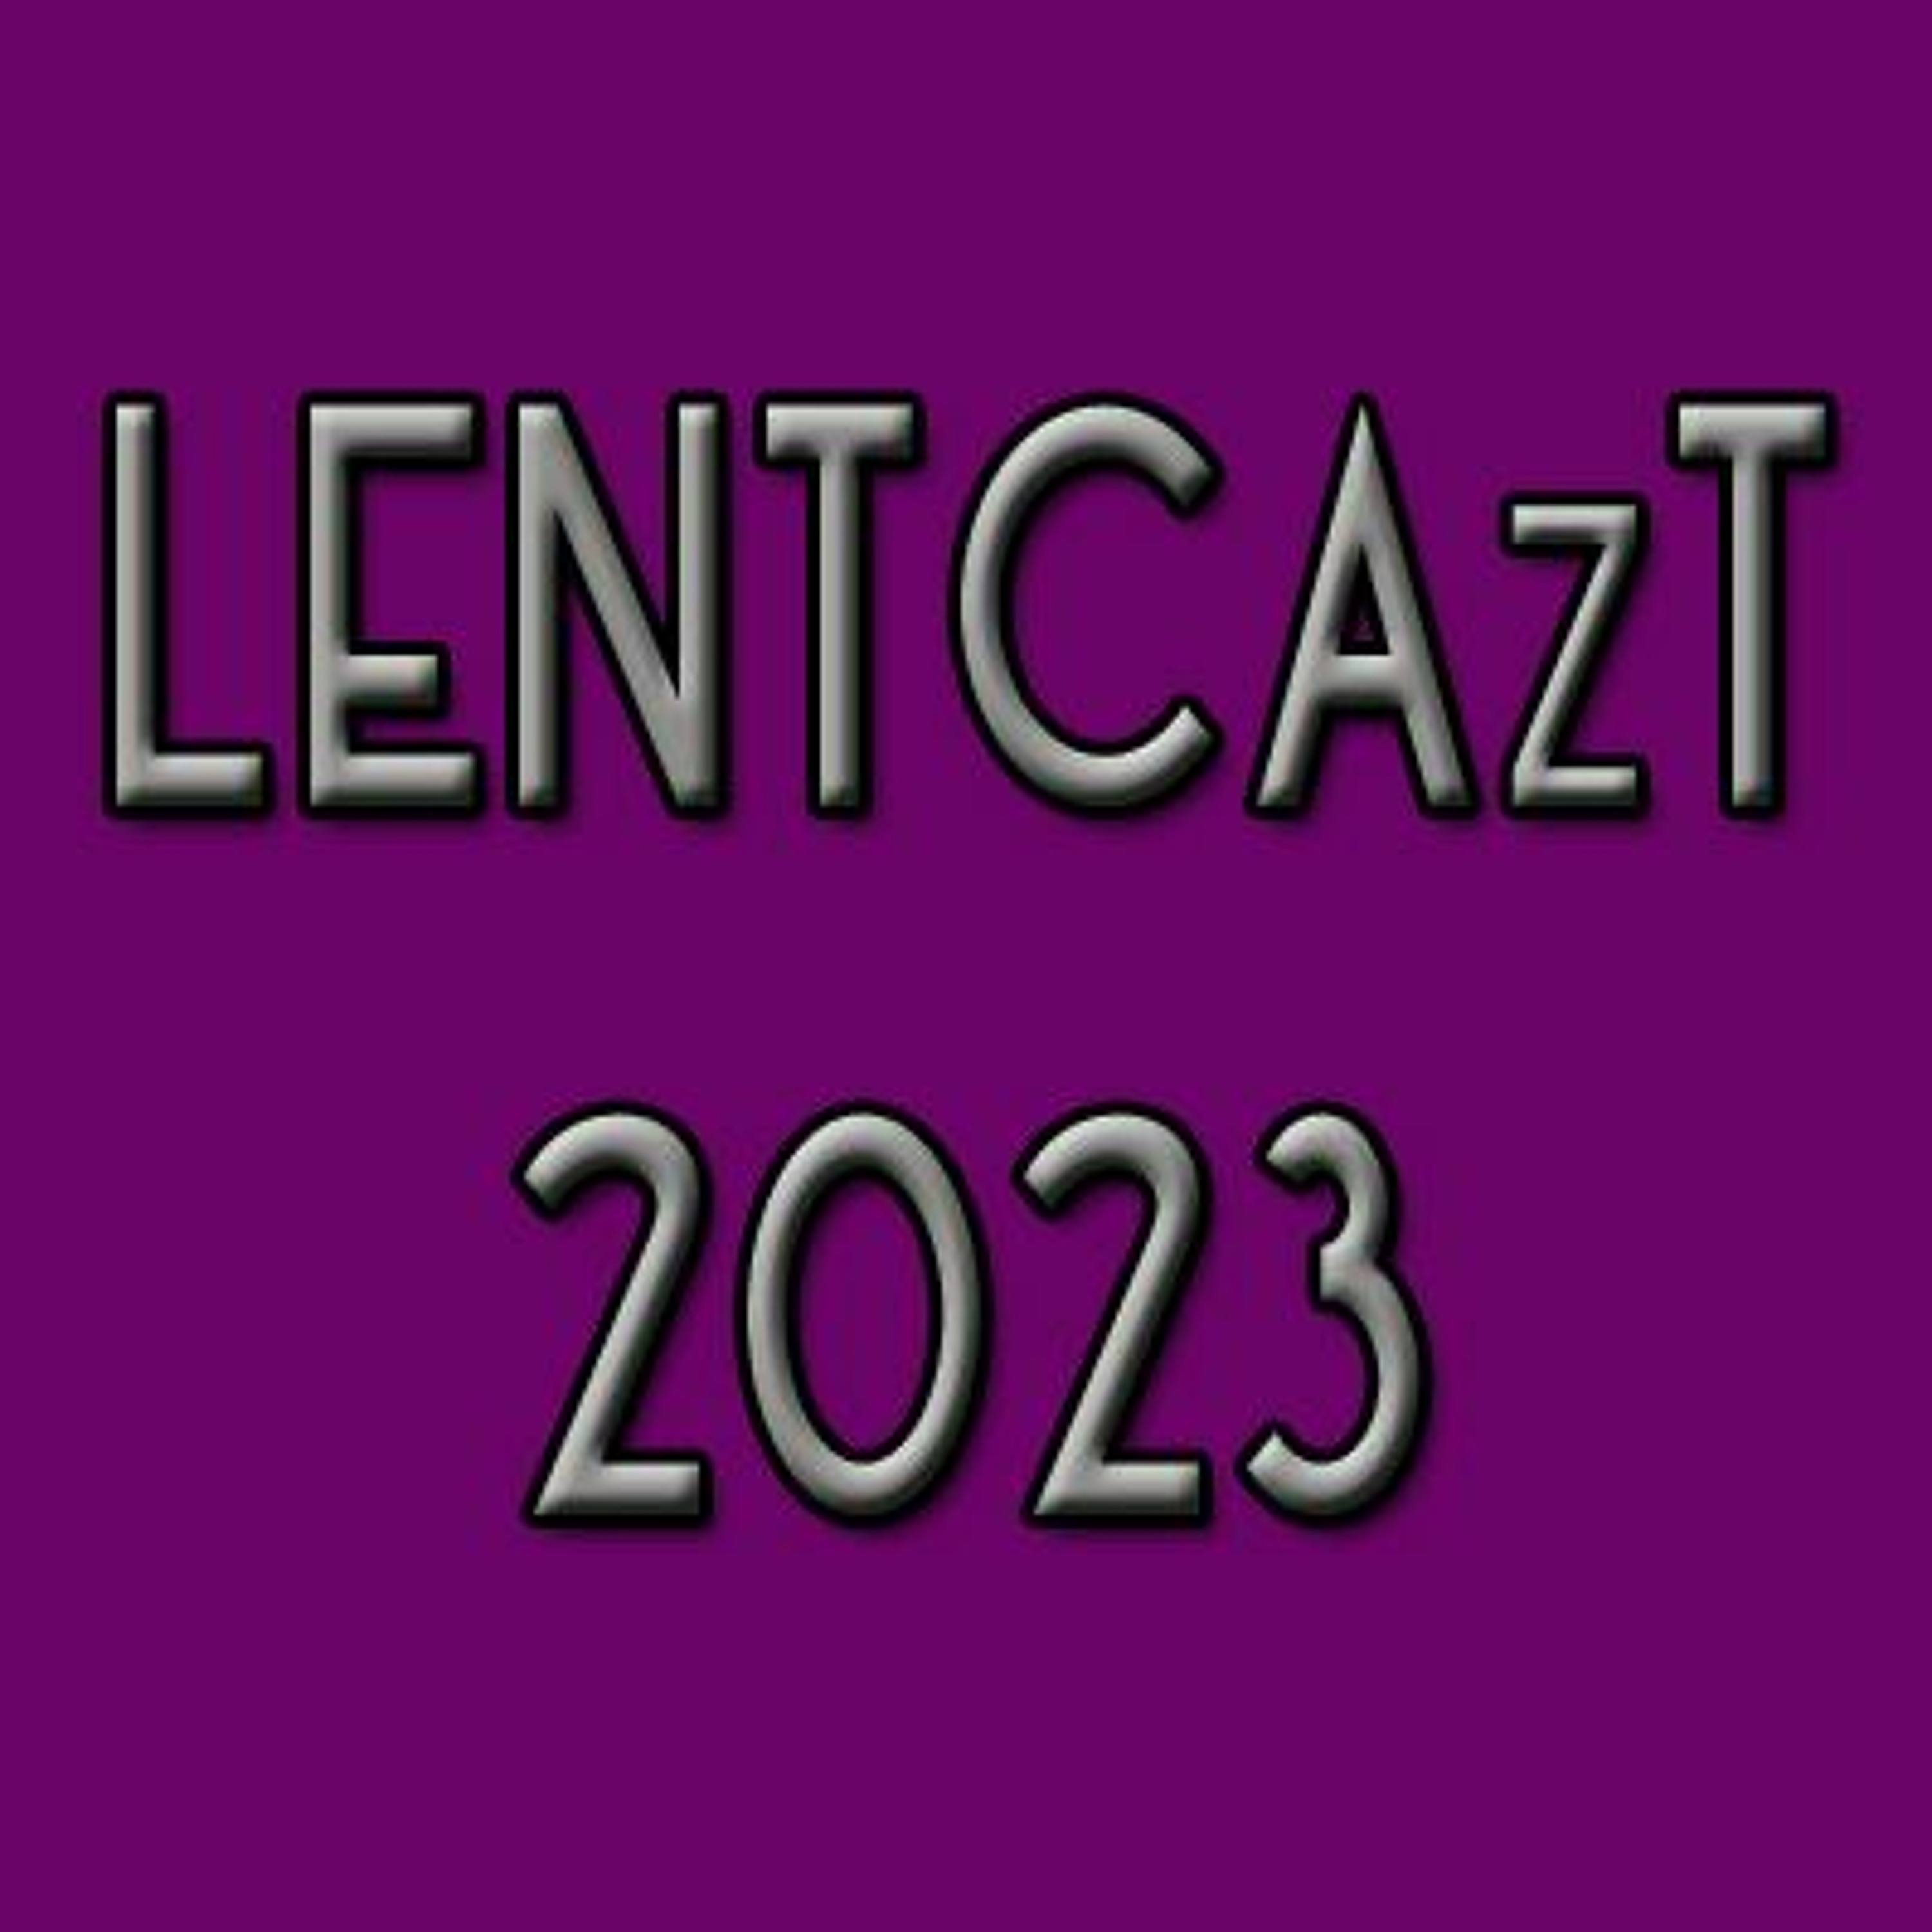 LENTCAzT 2023 - 35: Tuesday Passiontide - When the hour comes